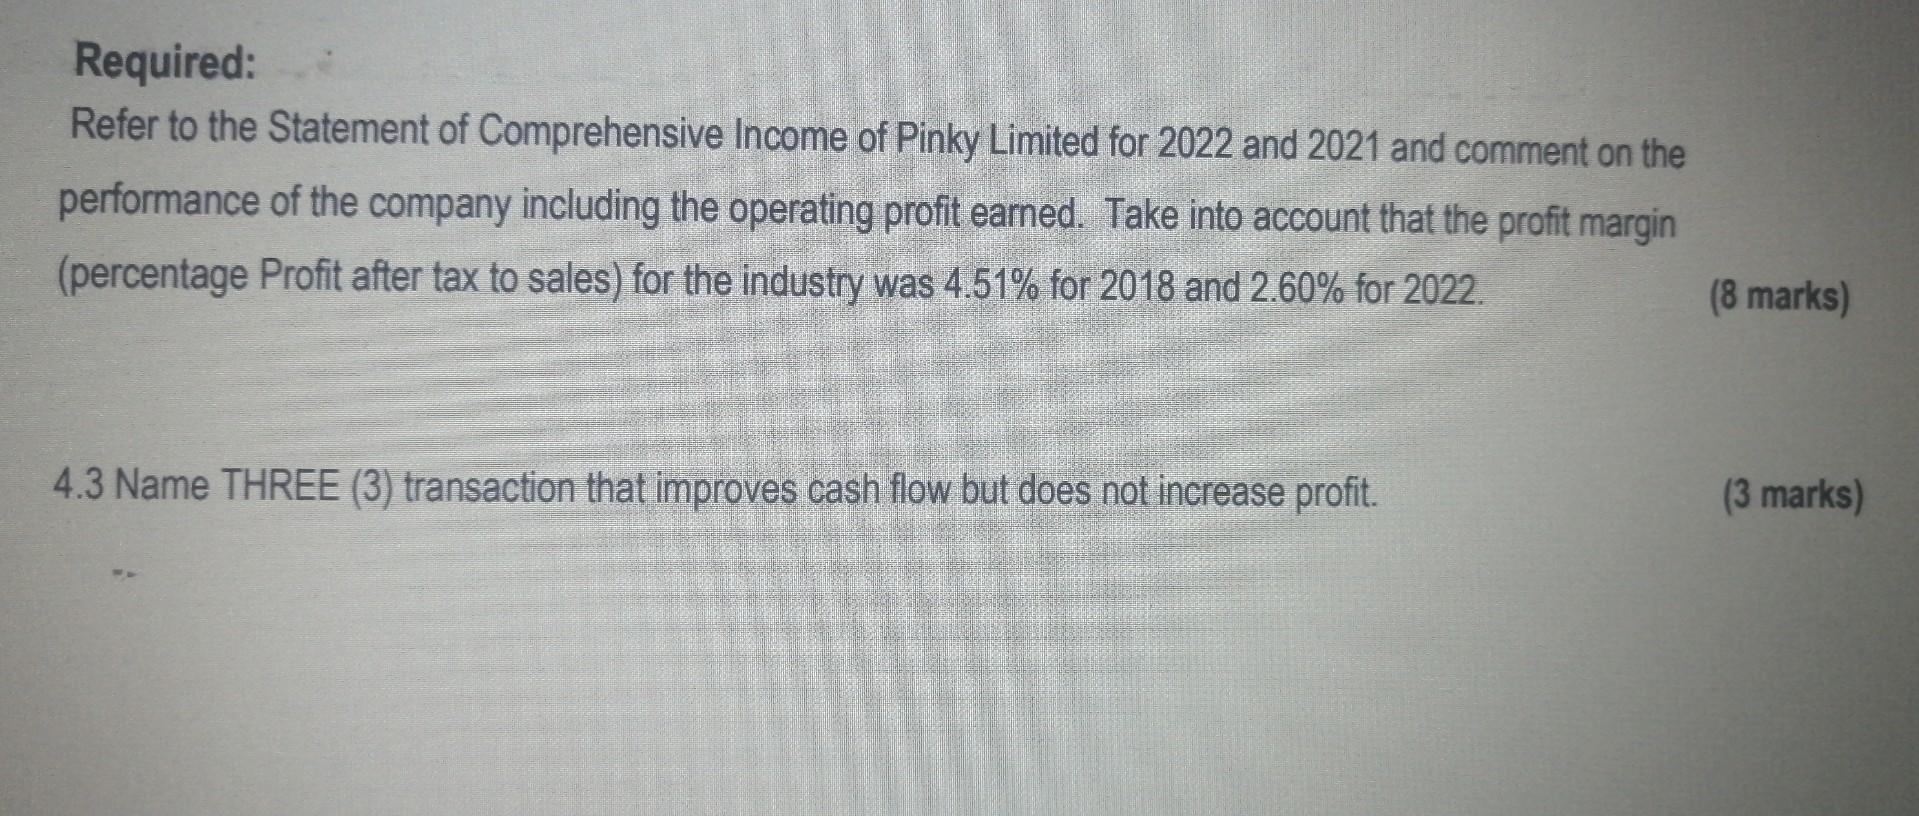 Required: Refer to the Statement of Comprehensive Income of Pinky Limited for 2022 and 2021 and comment on the performance of